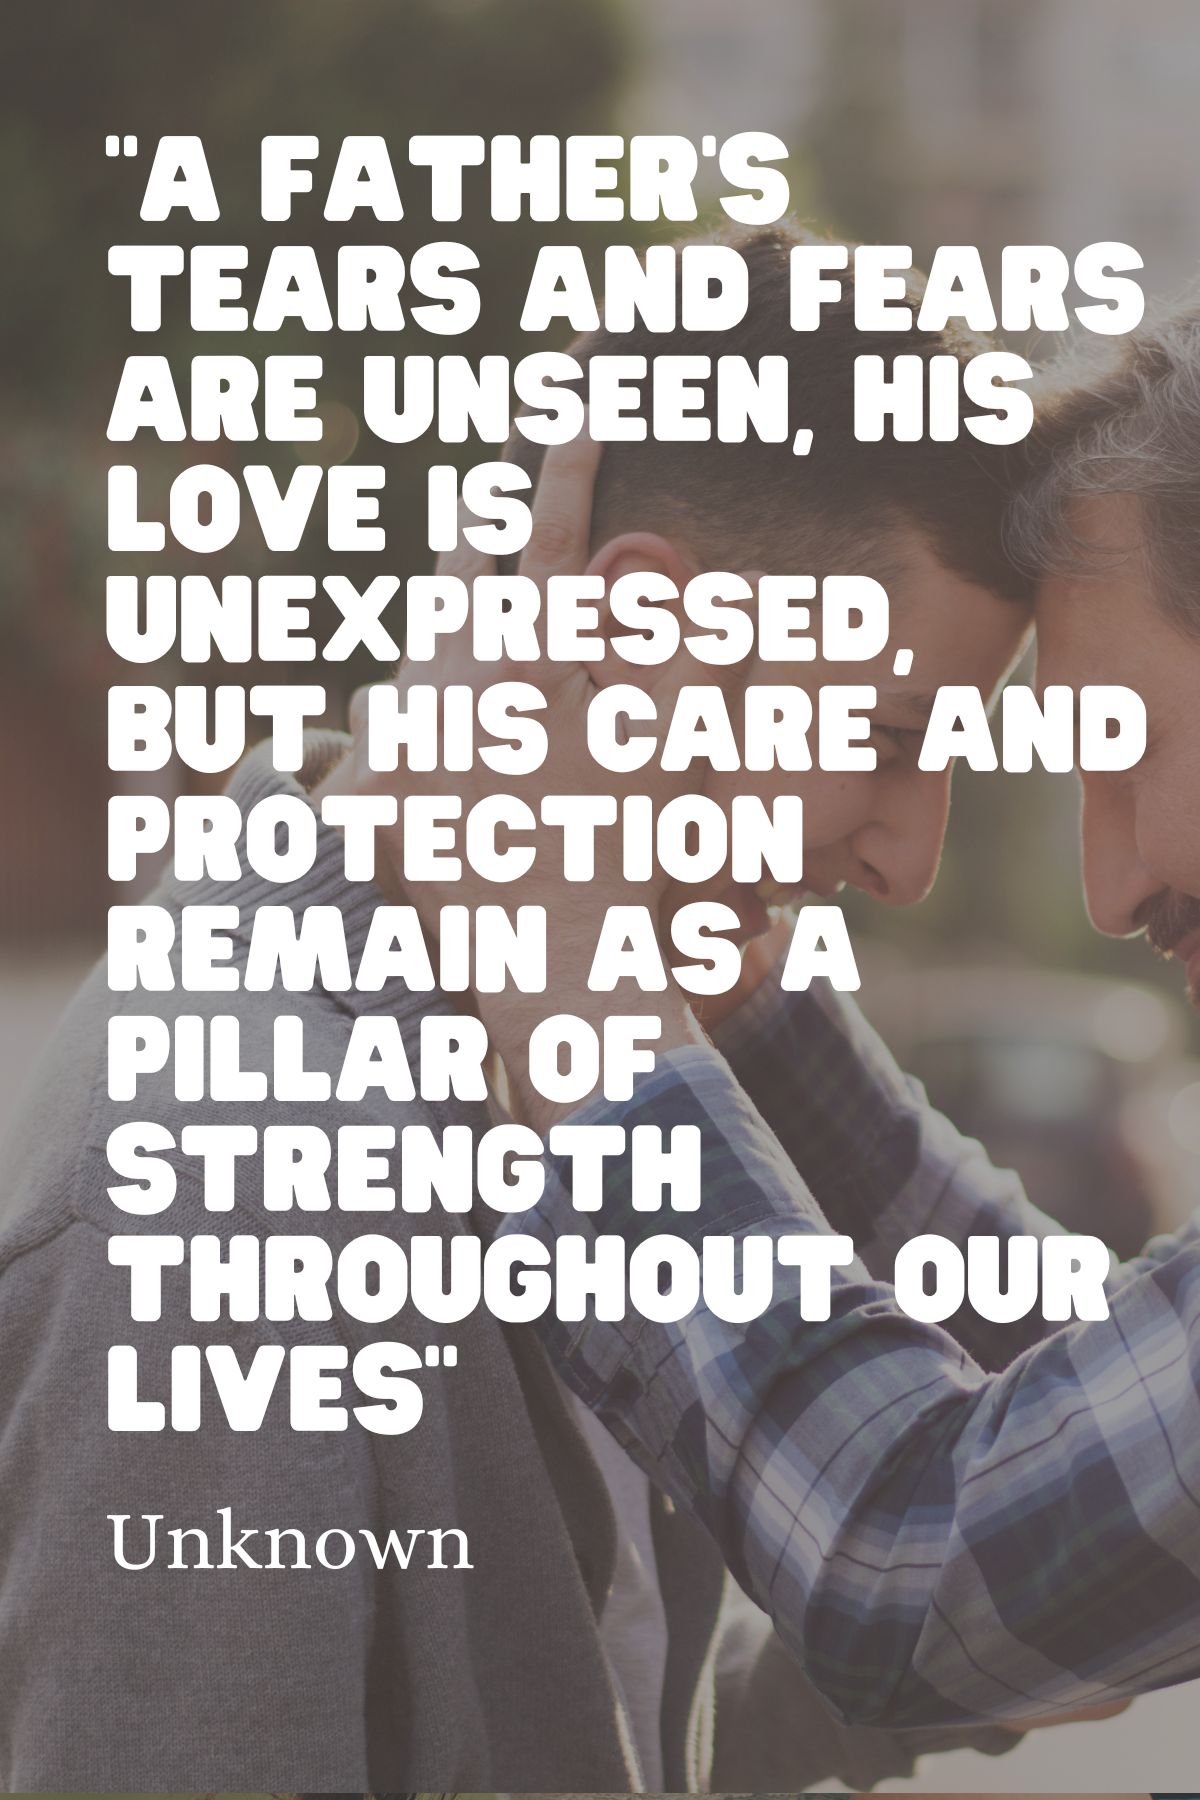 "A father’s tears and fears are unseen, his love is unexpressed, but his care and protection remain as a pillar of strength throughout our lives" – Unknown quote for loving your father